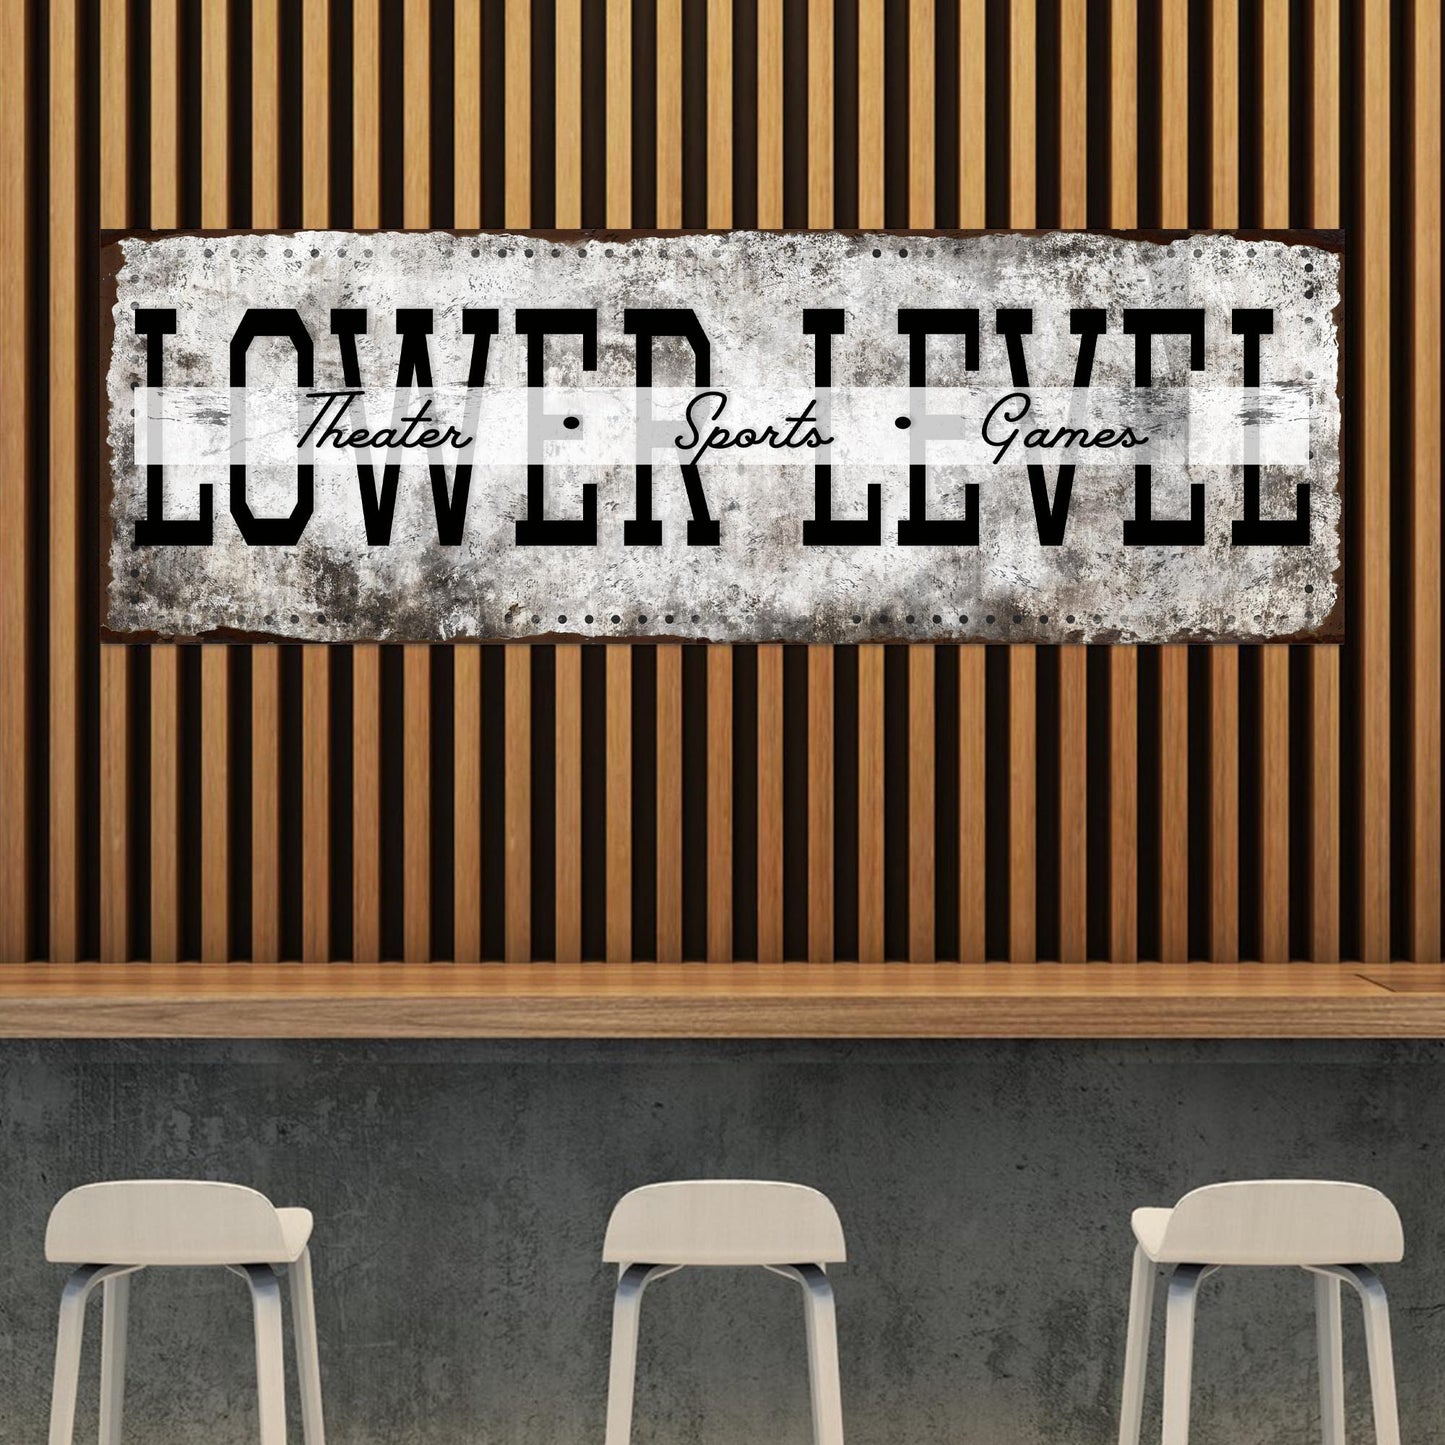 Lower Level Theater Sports Games Basement Bar Sign Style 2 - Image by Tailored Canvases